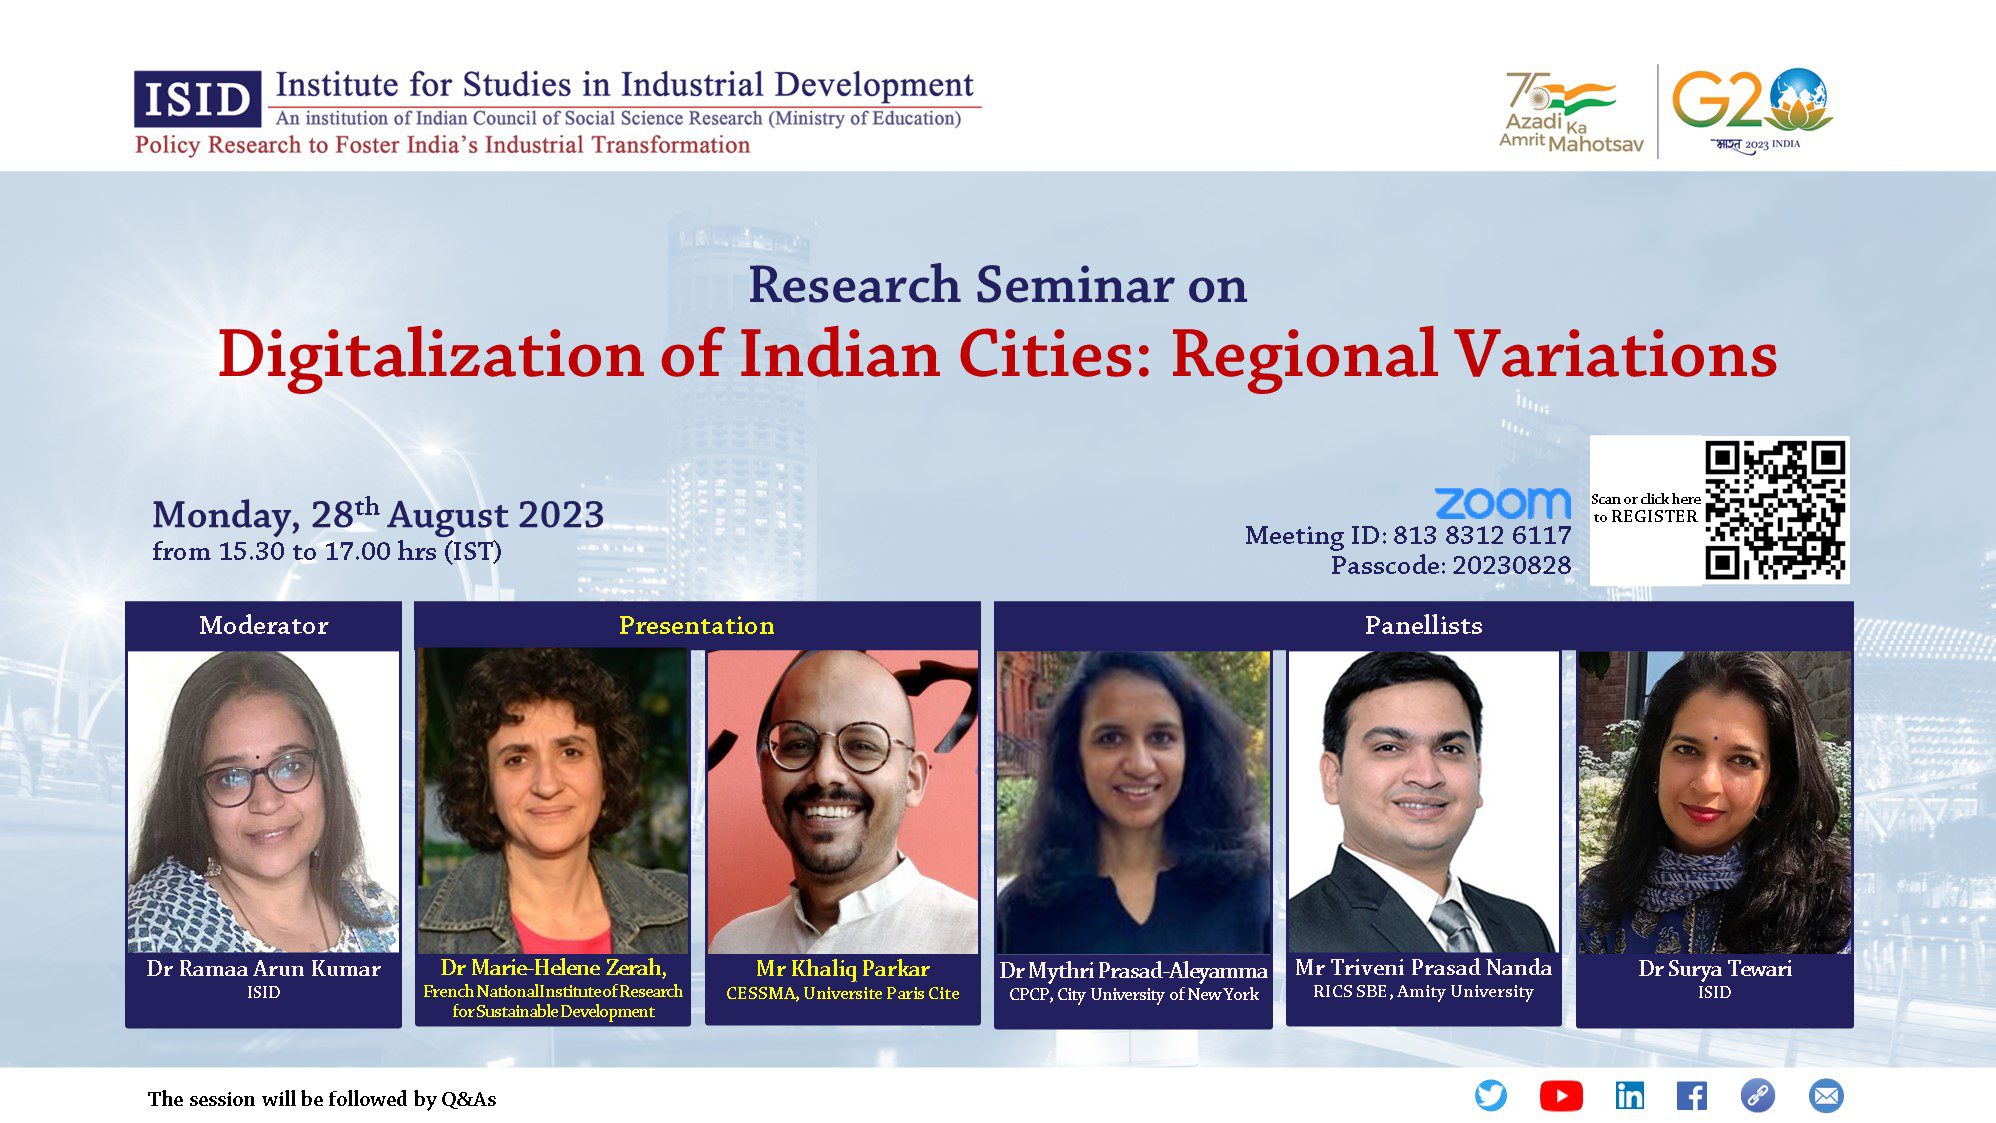 Research Seminar on Digitalization of Indian Cities: Regional Variations